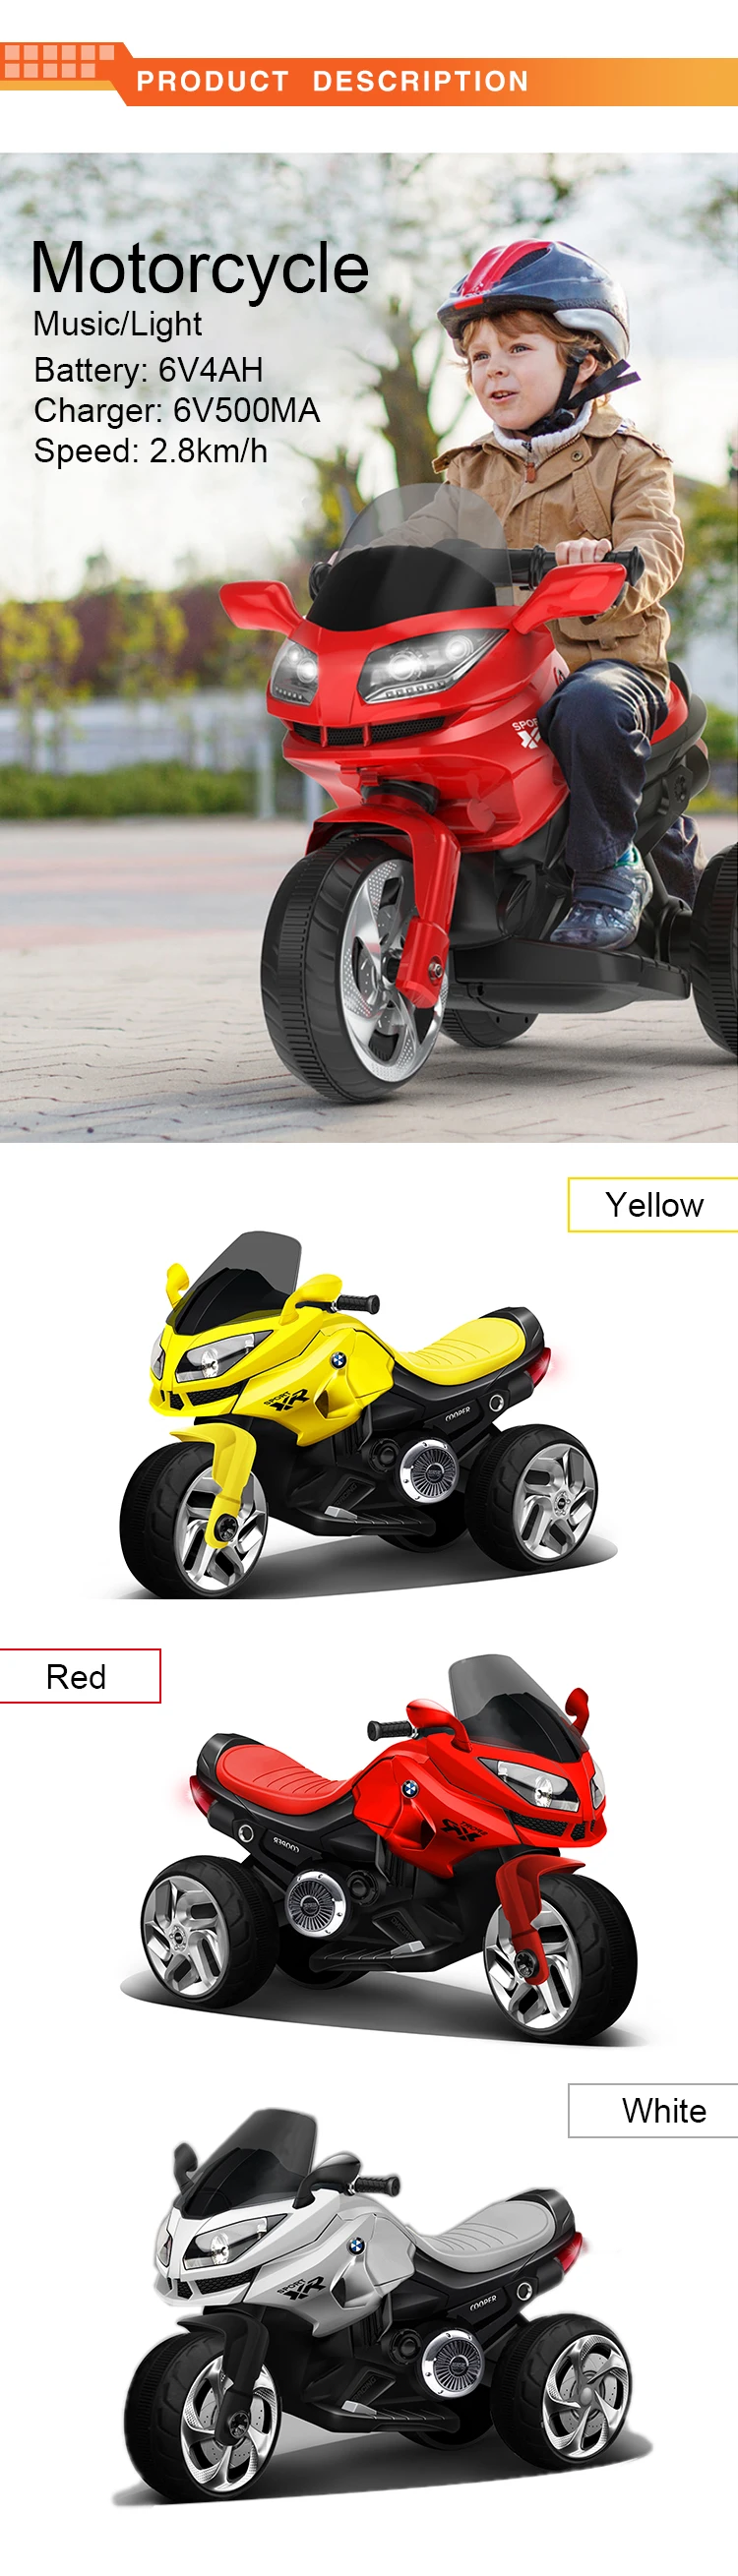 Top sale fashion design baby ride on car toy music light electric motorcycle for kids